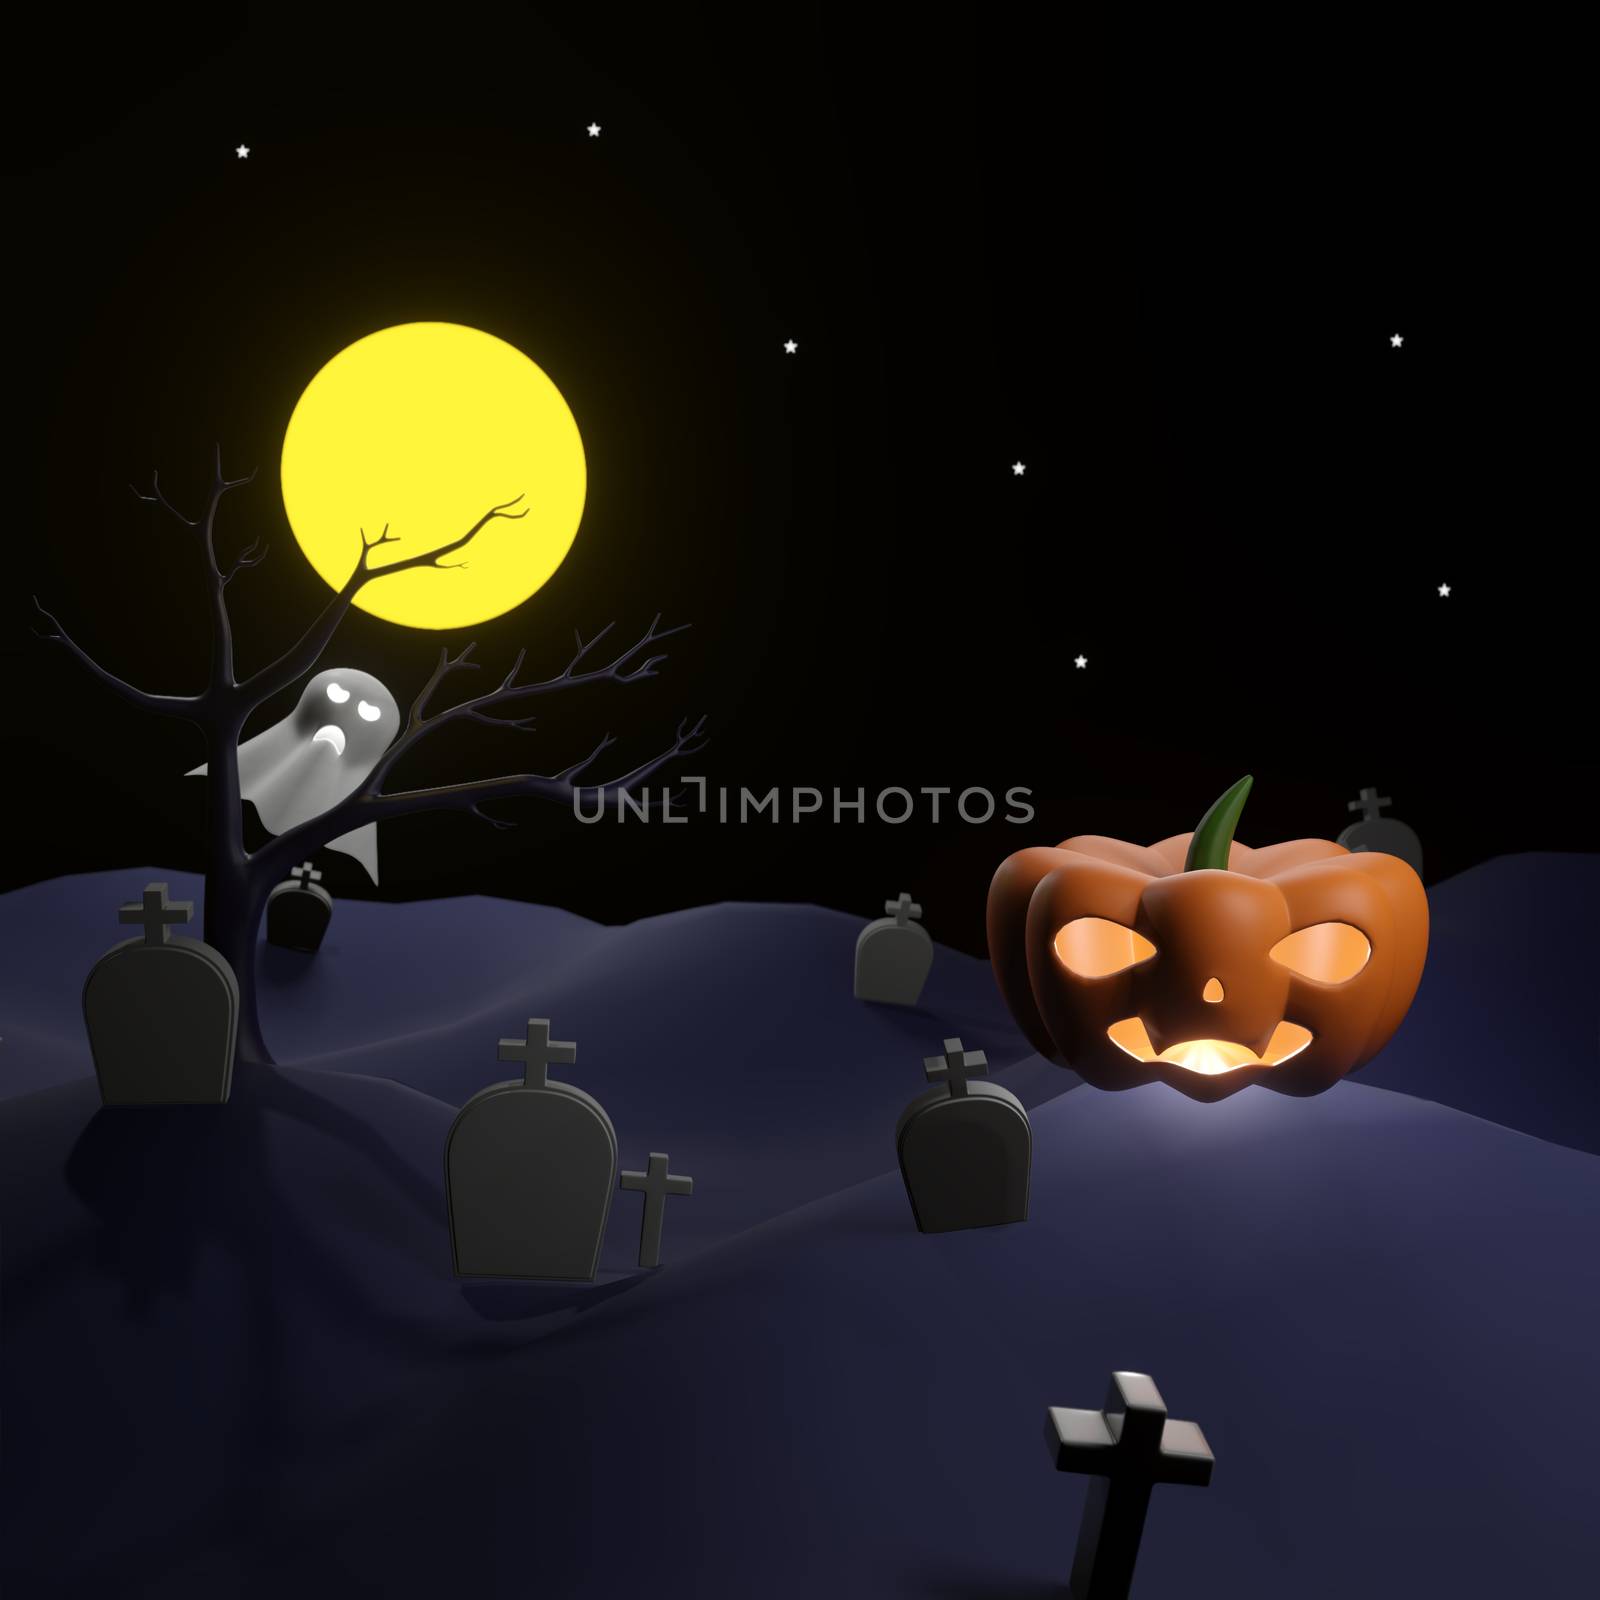 Orange pumpkin with light on land of graveyard have blur ghost behind dead tree with full moon and pleiades as background. Halloween night scene 3d render.